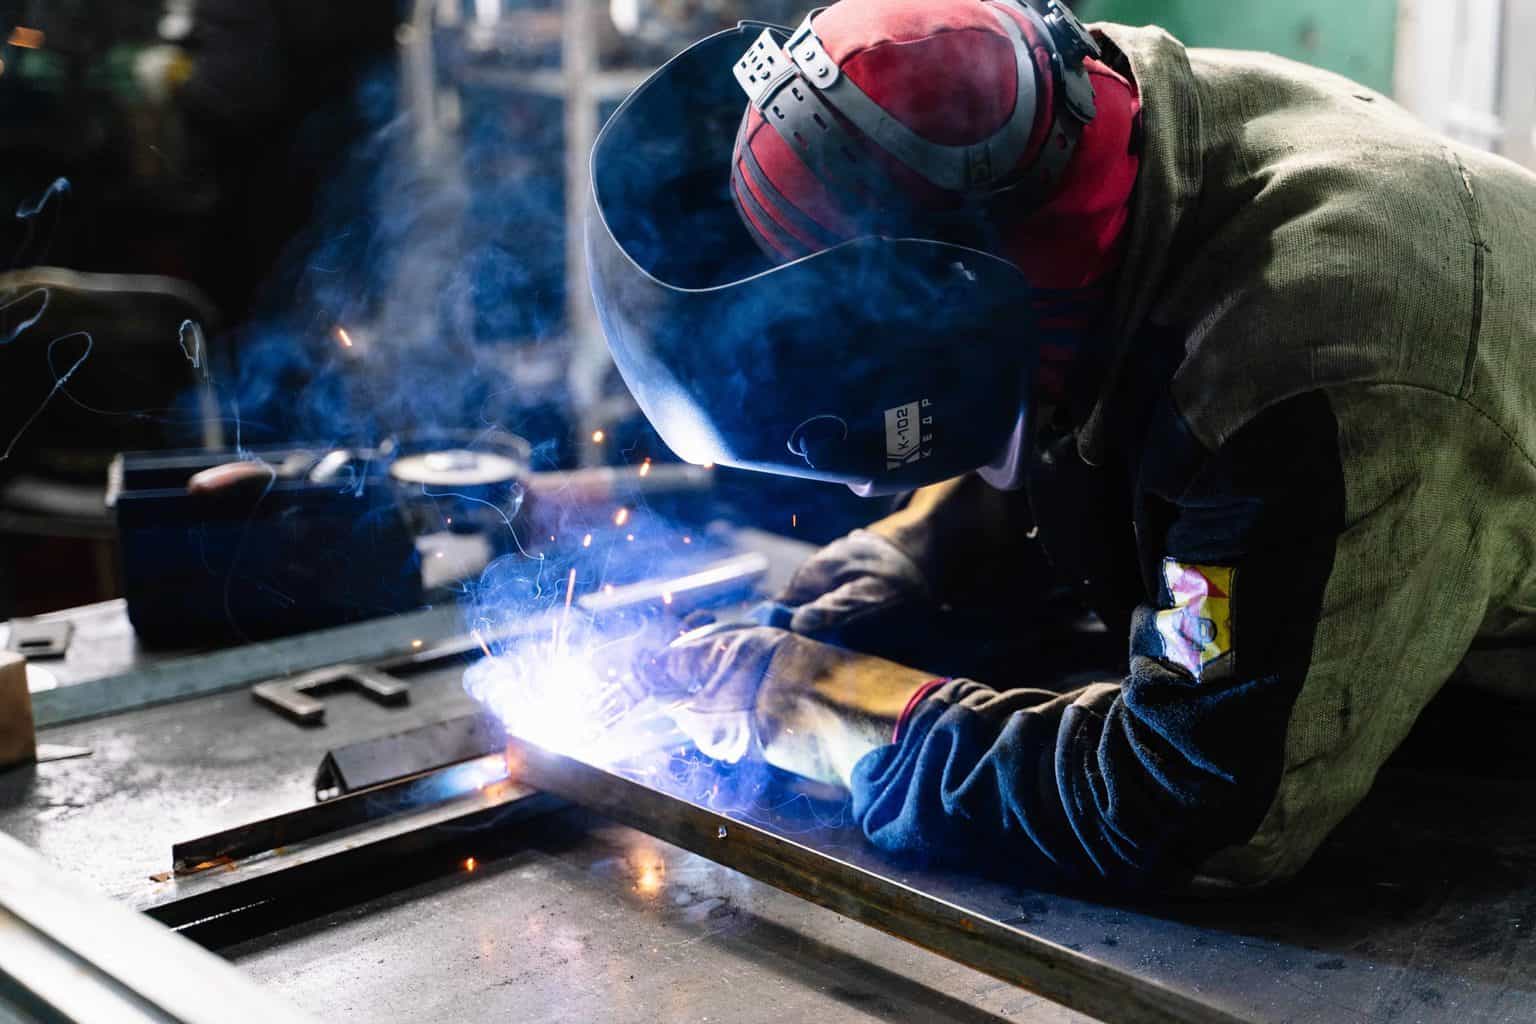 welder with a green jacket doing his work